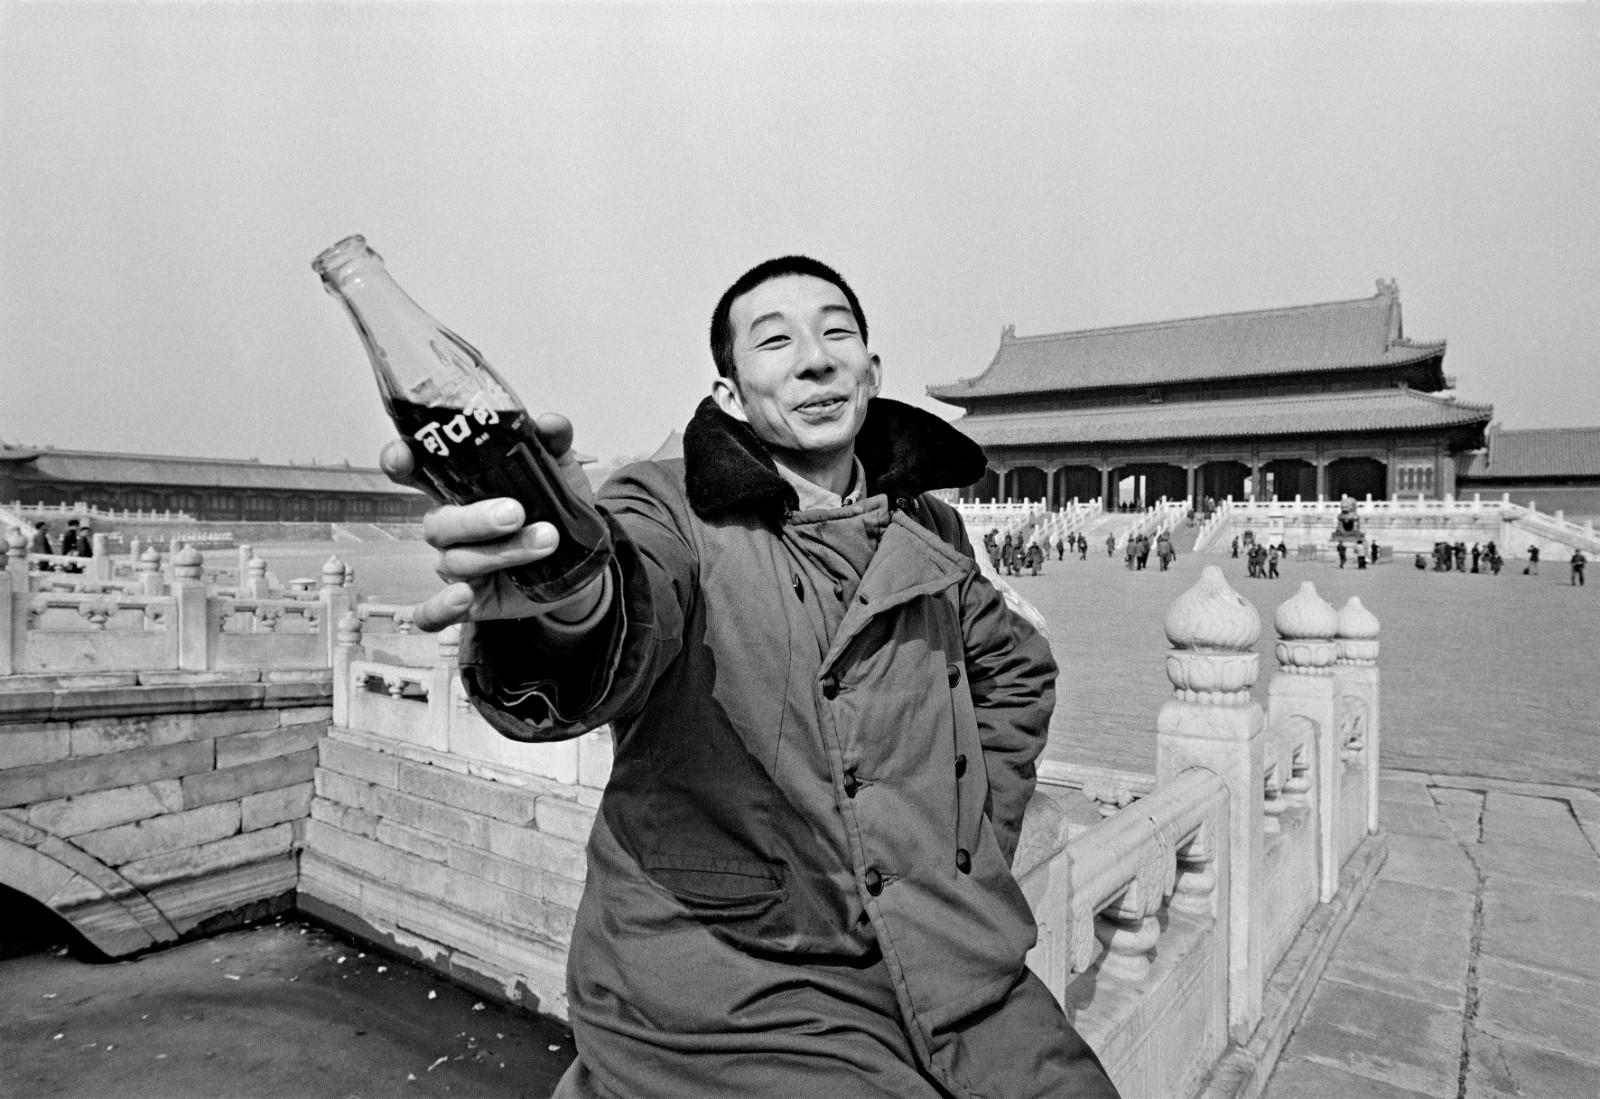 "Coca-Cola Feel the Taste!" A young man proffers the iconic glass bottle which symbolizes Coca-Cola around the world. The Coca-Cola Company had just resumed production in China. Forbidden City, Beijing, 1981. 